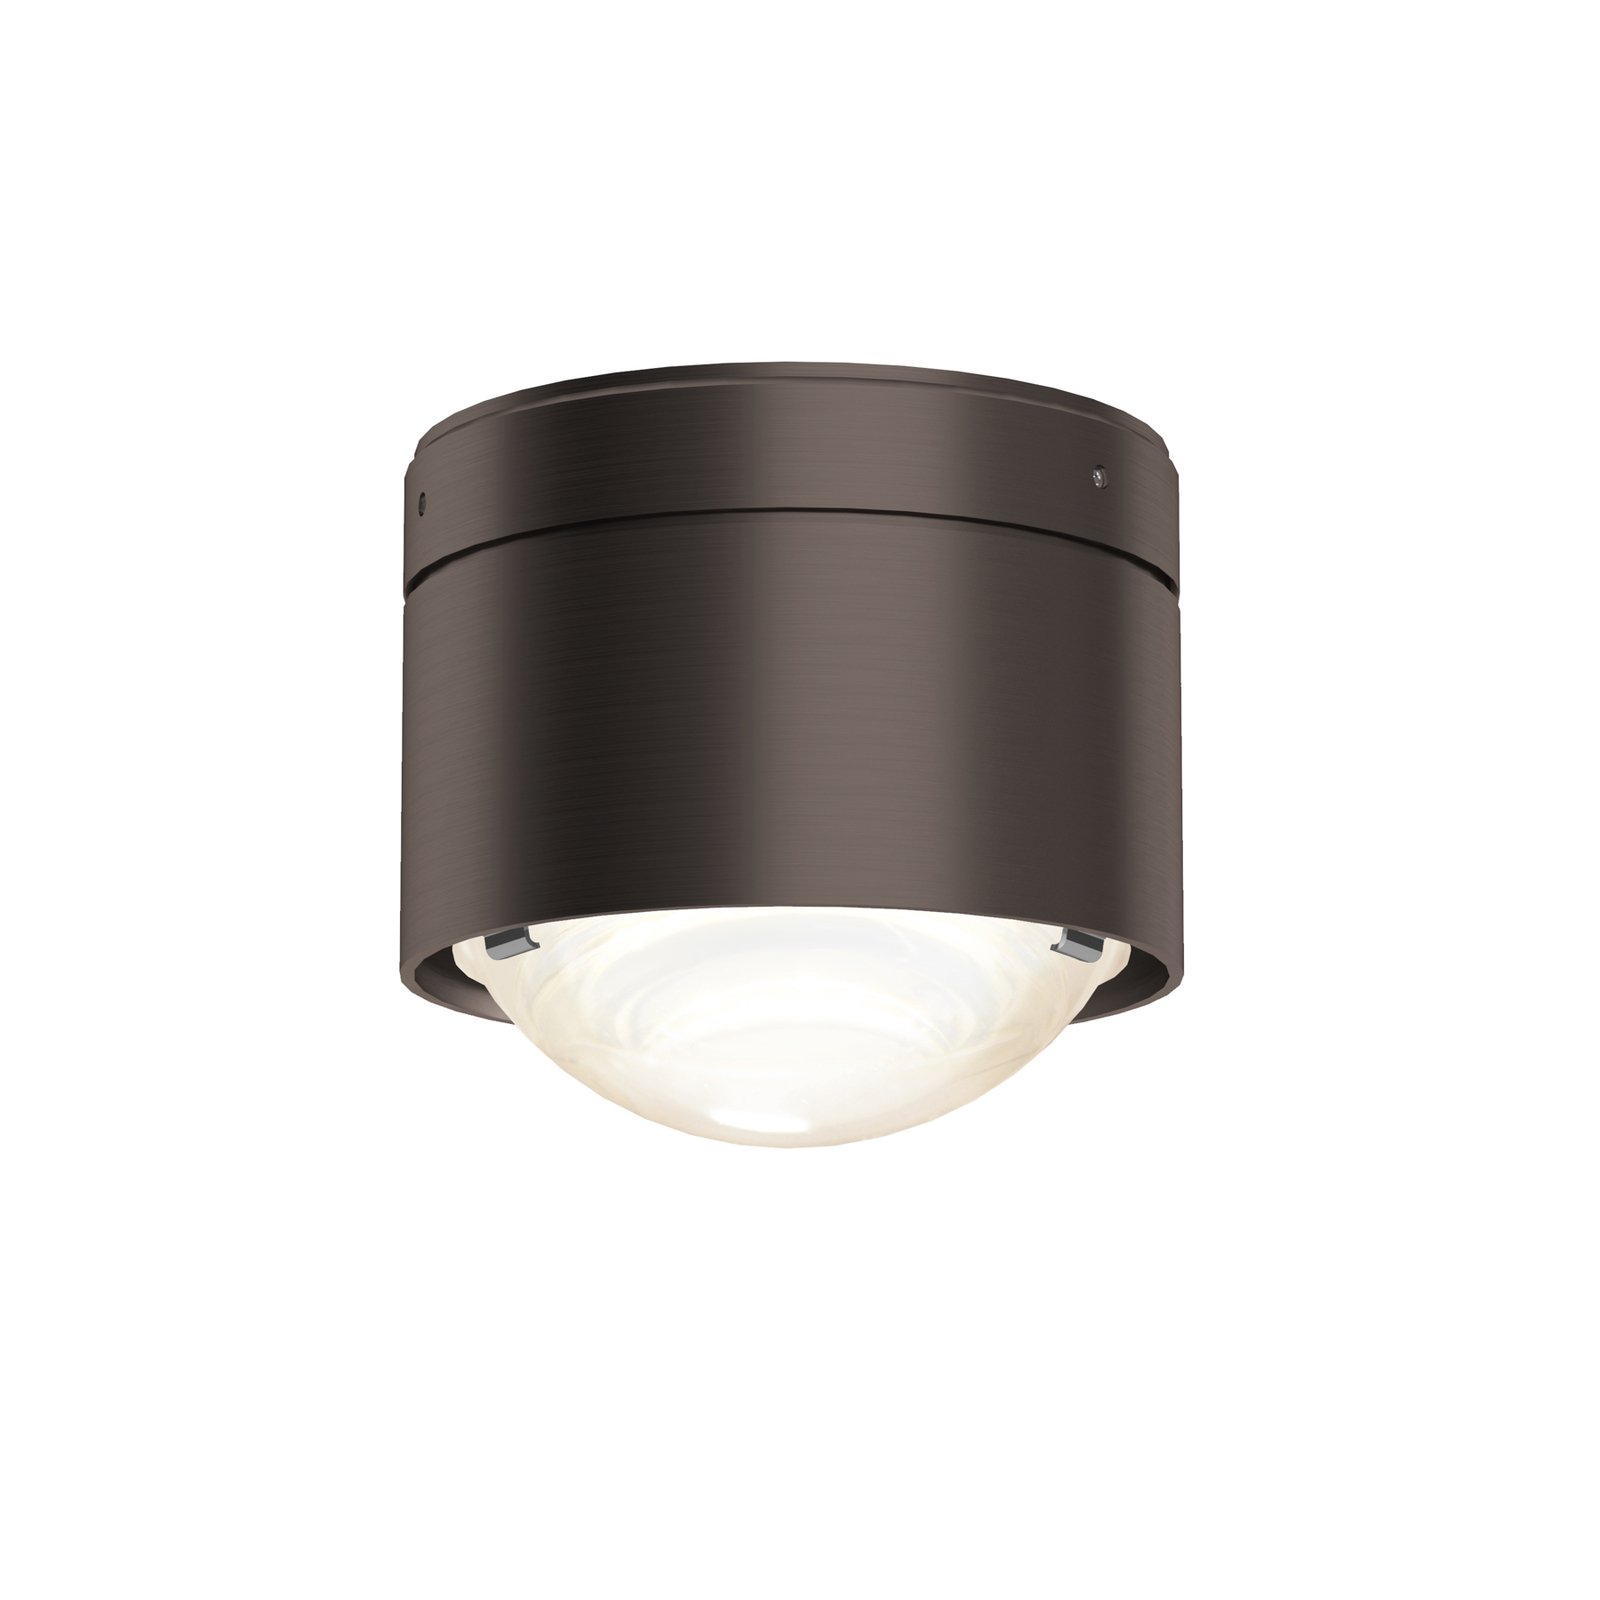 Puk! 80 One downlight LED lente mate marrón oscuro